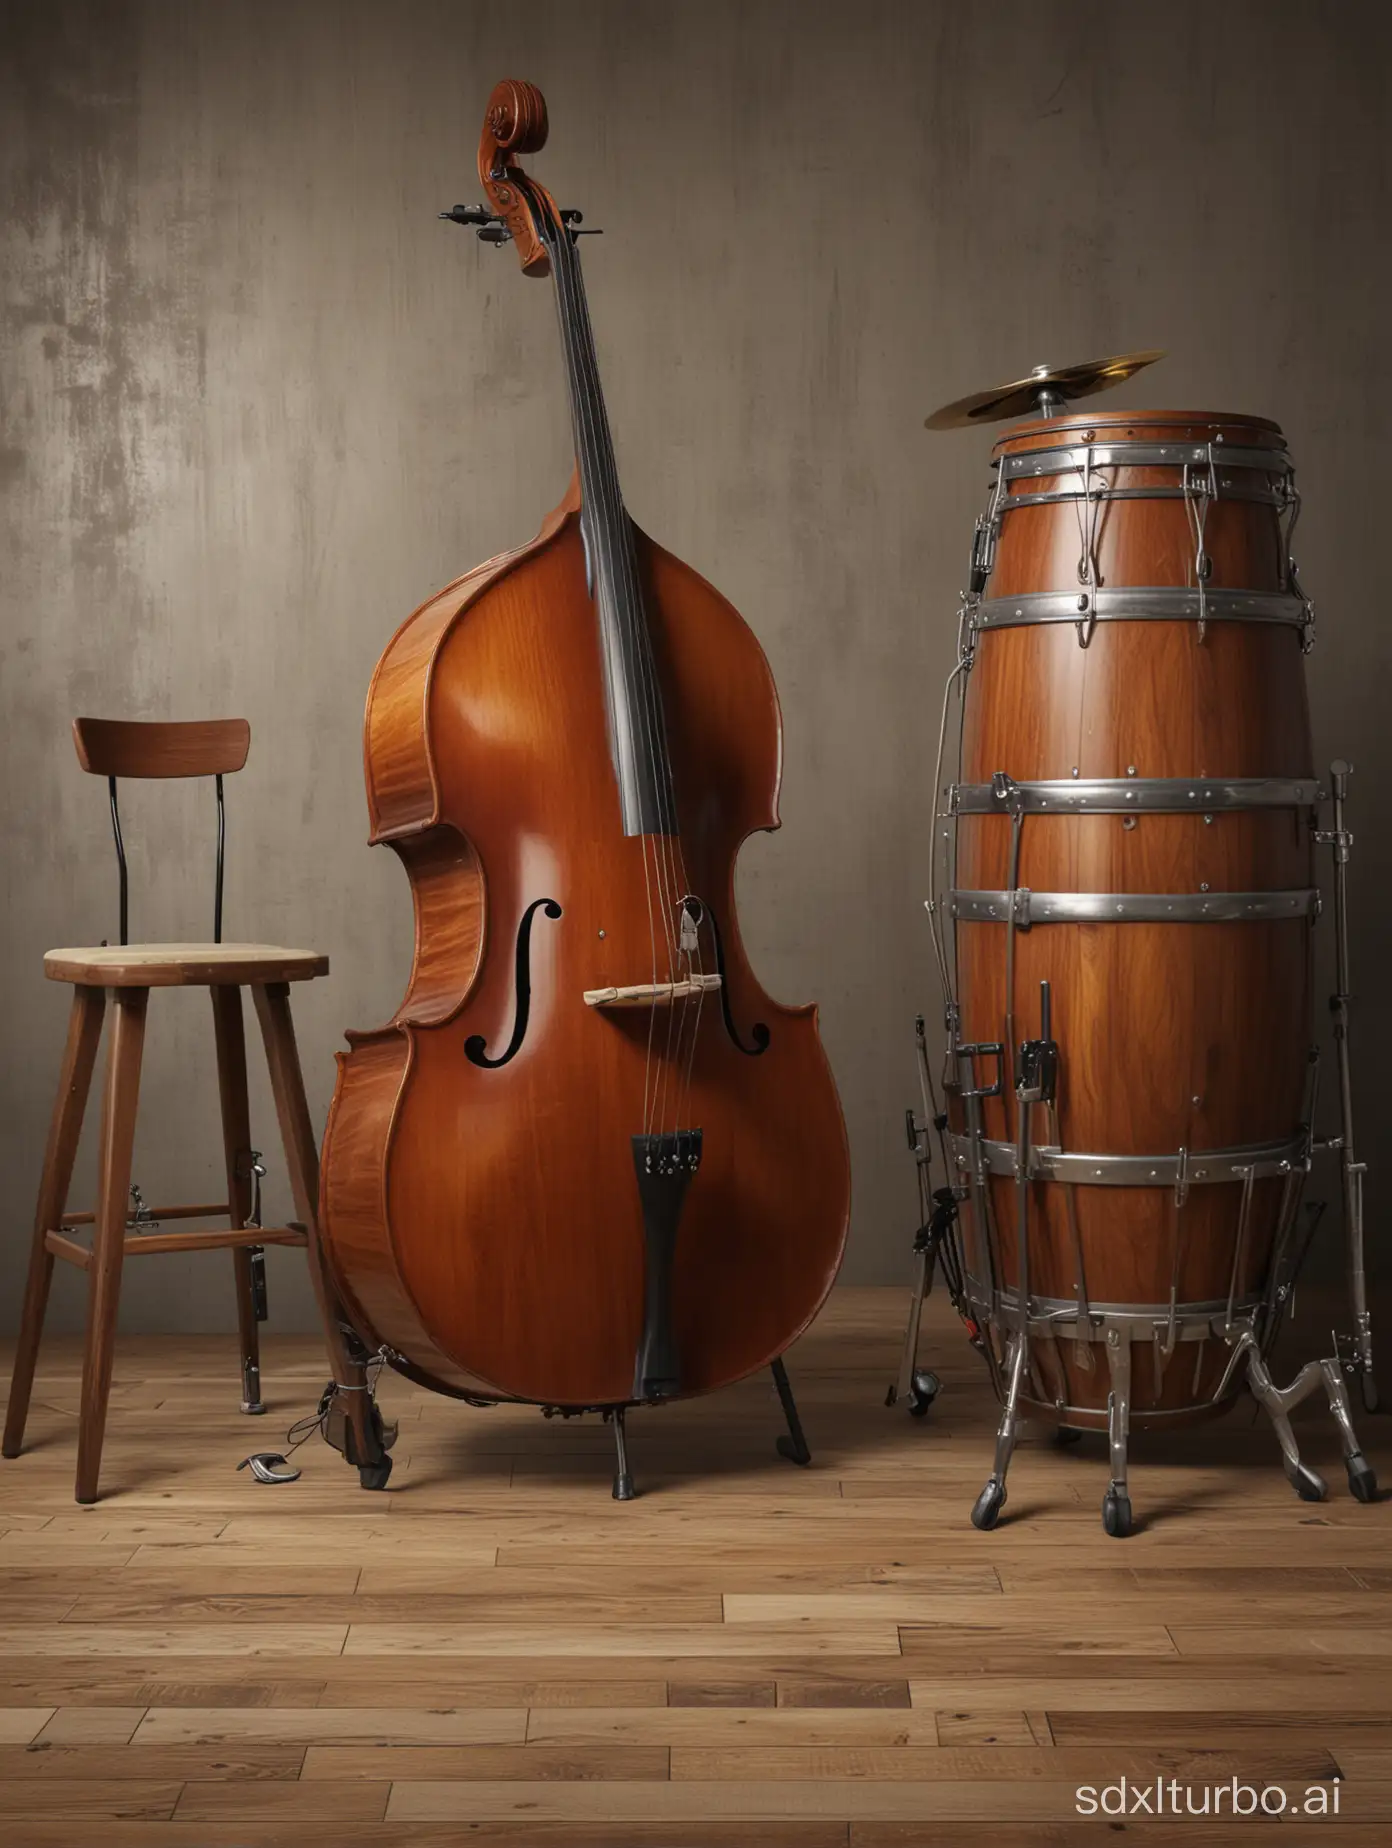 Jazz-Trio-Performance-with-Upright-Bass-Piano-and-Drum-Set-Against-Beer-Background